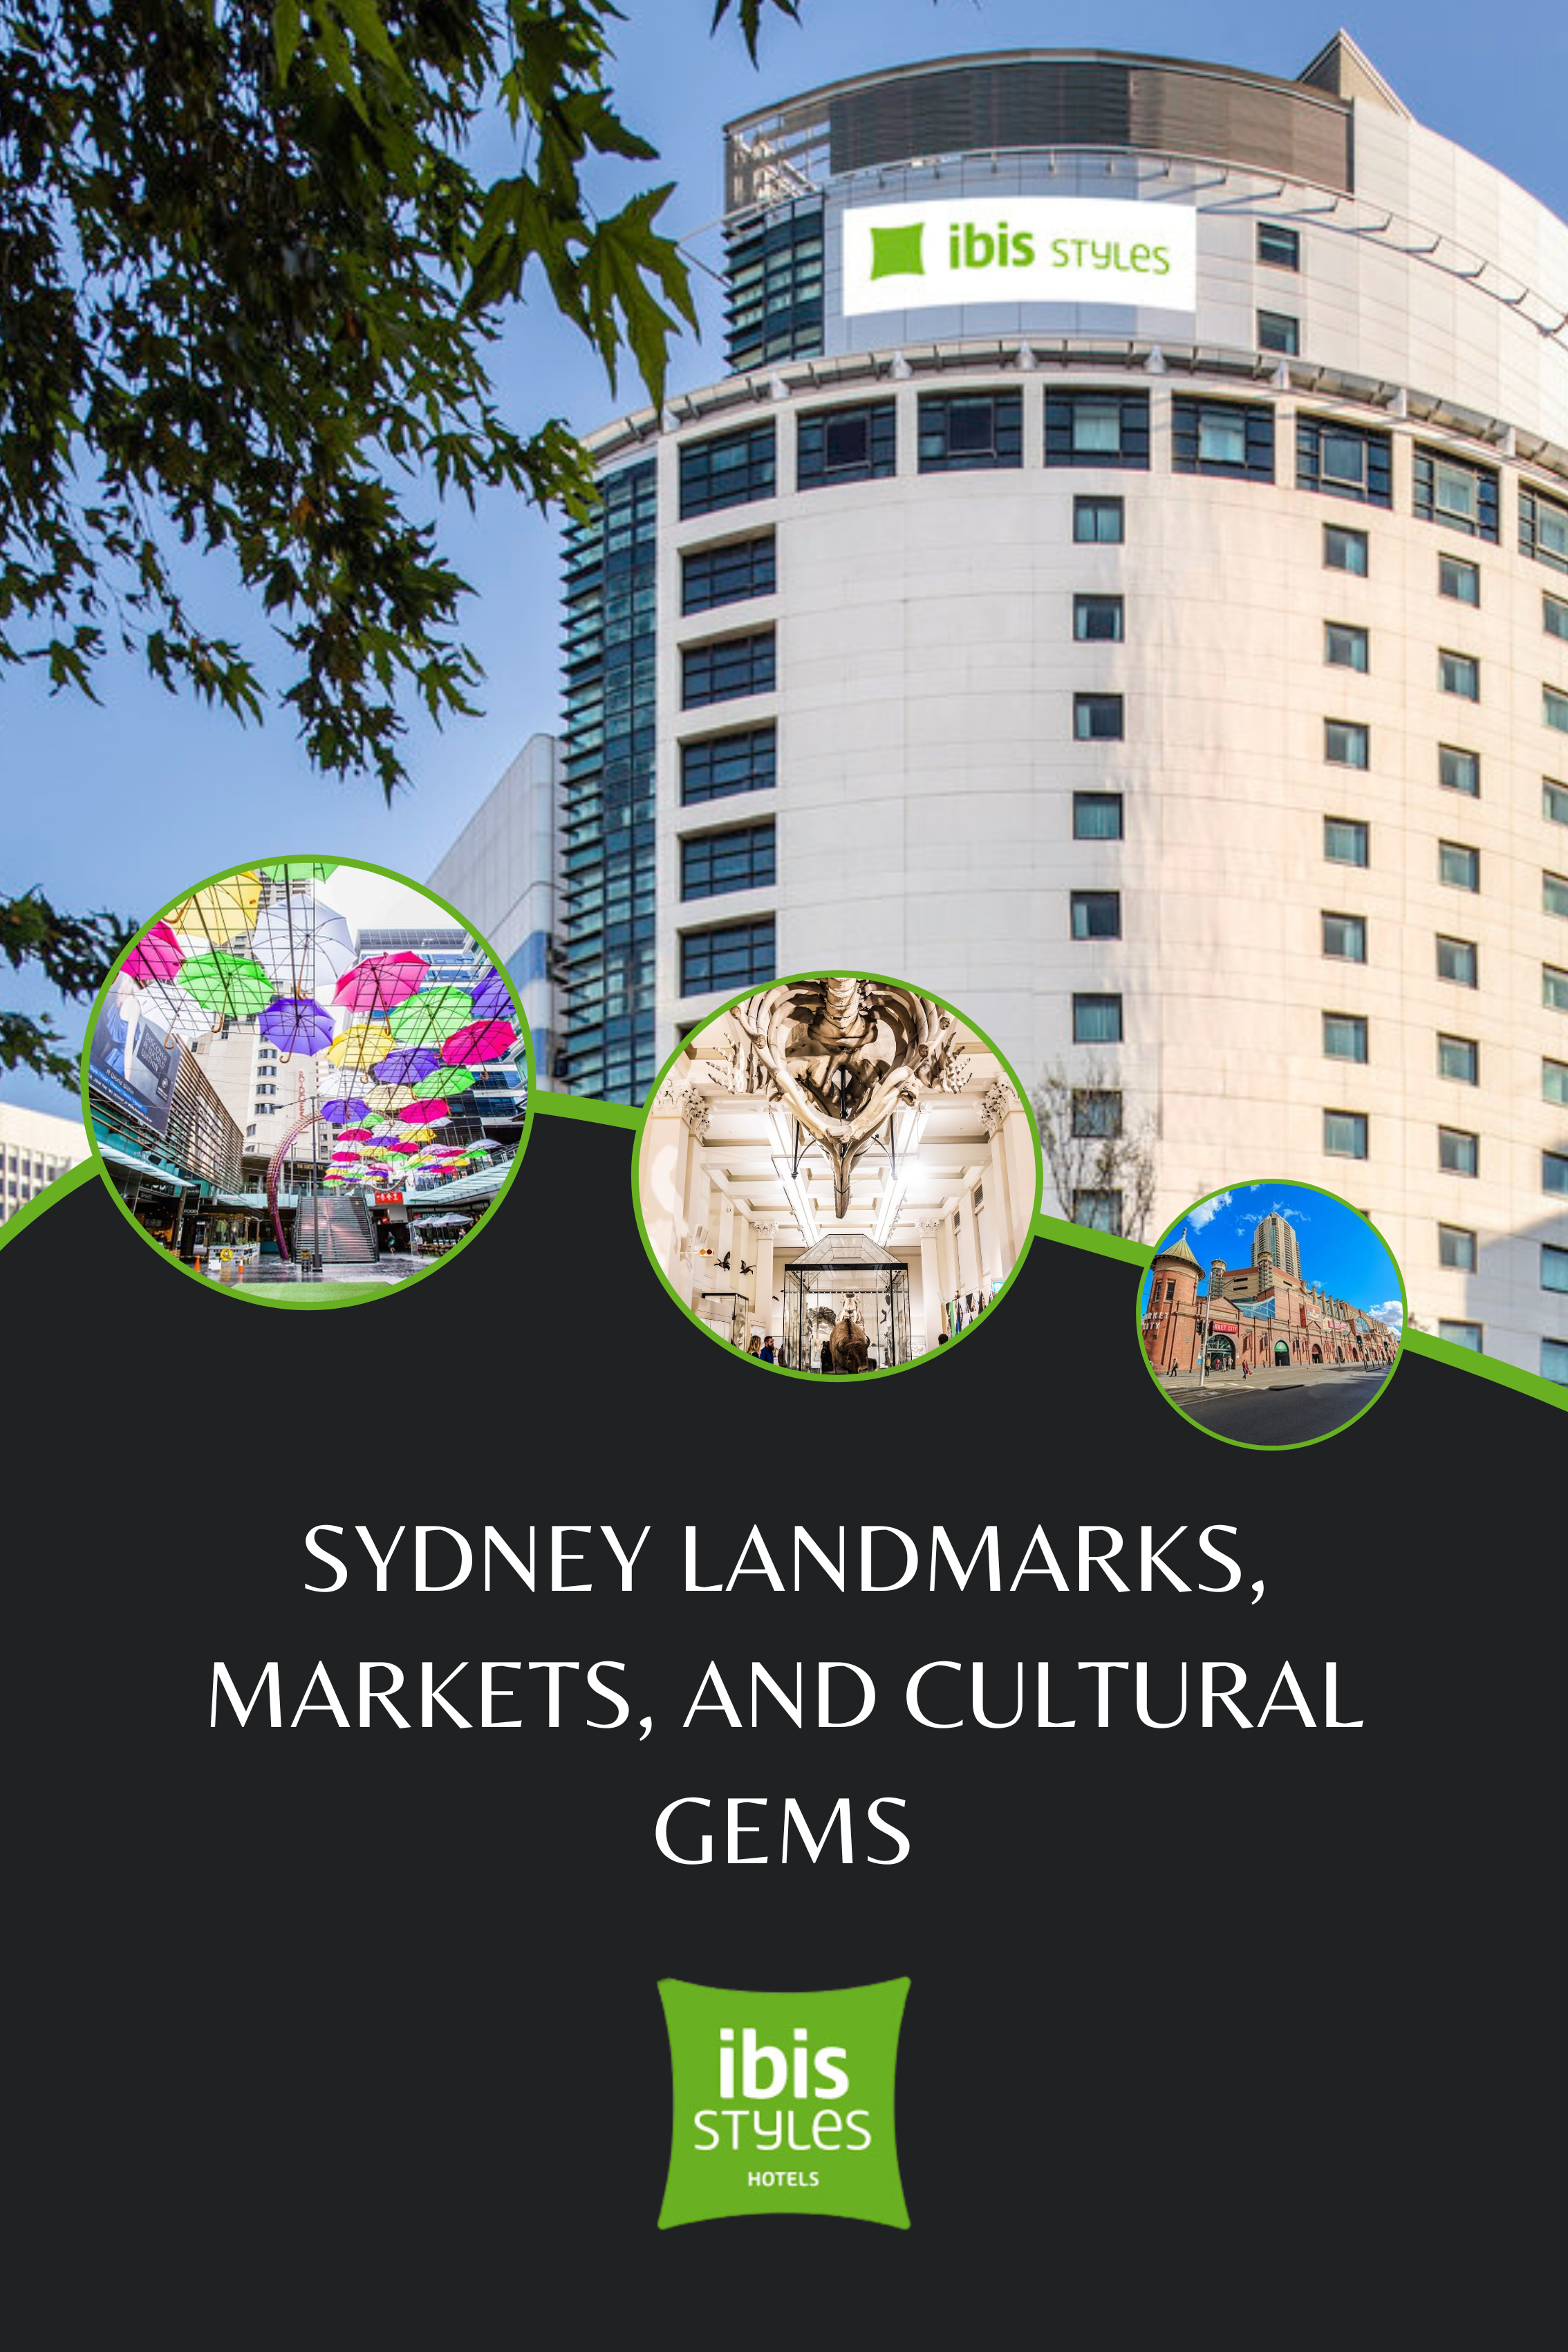 Sydney Landmarks, Markets, and Cultural Gems with Ibis Styles